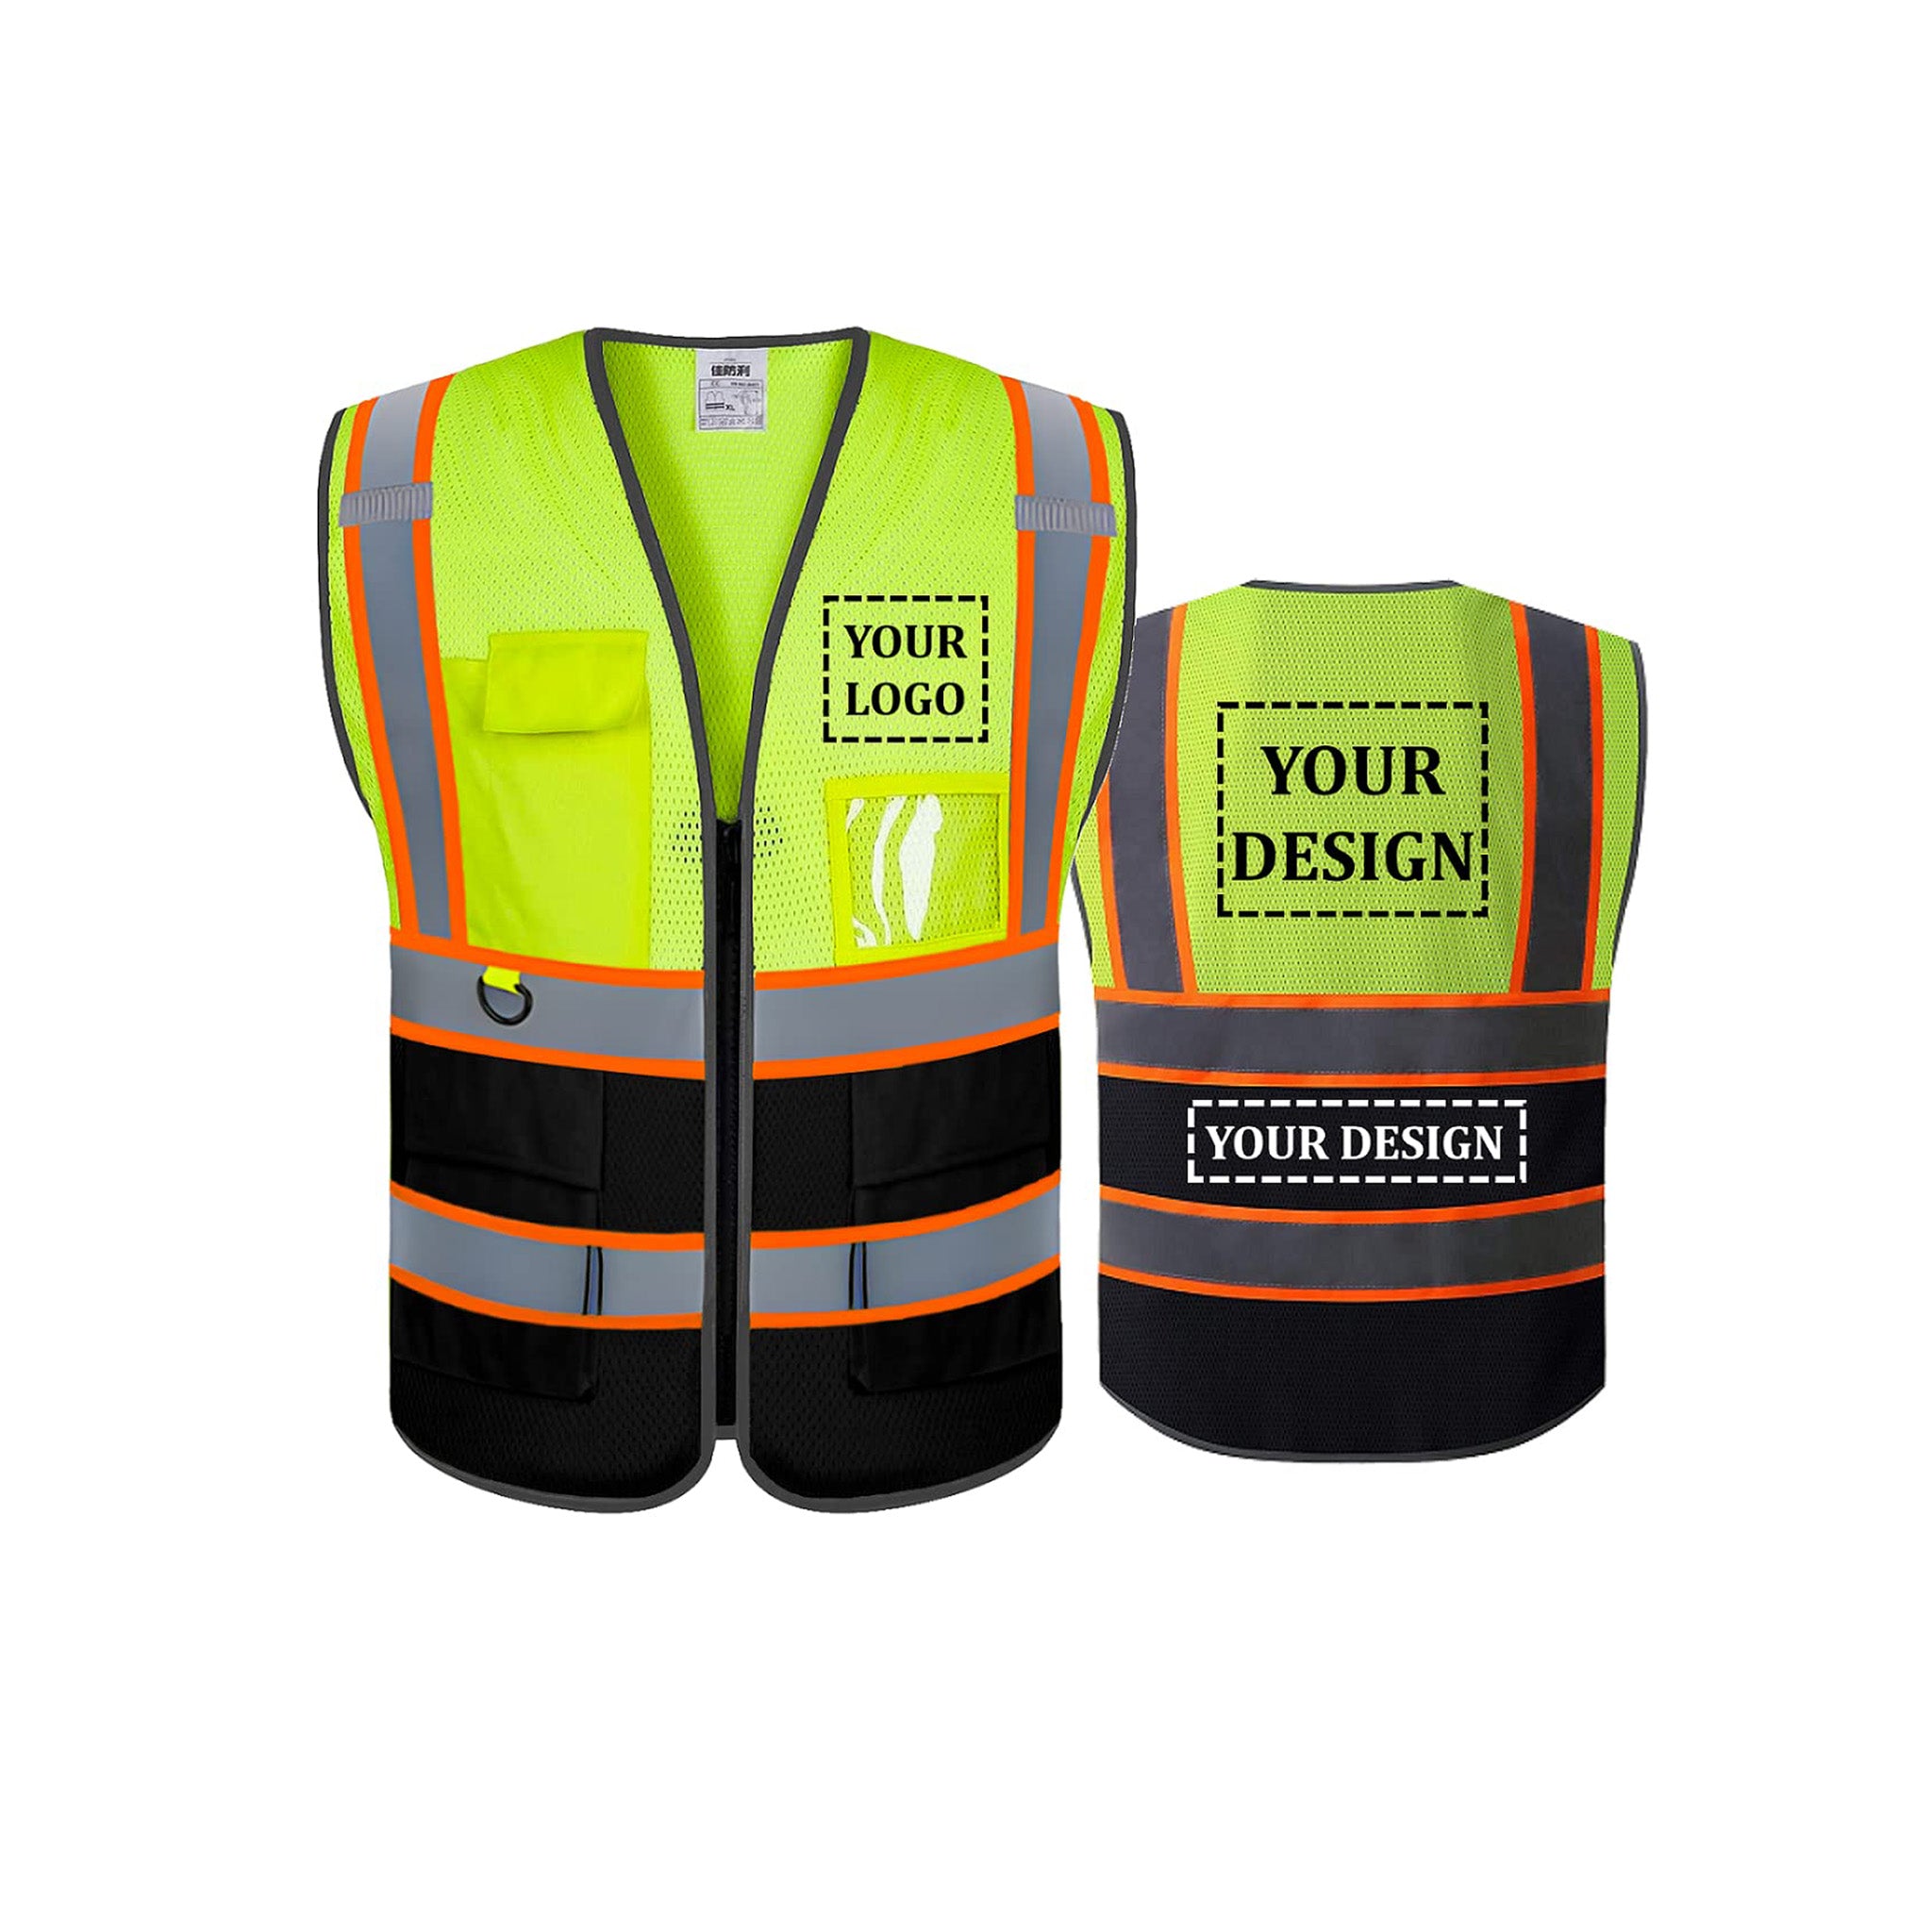 Custom Safety Vests with Your Logo Online Free - SafetyCustom.com